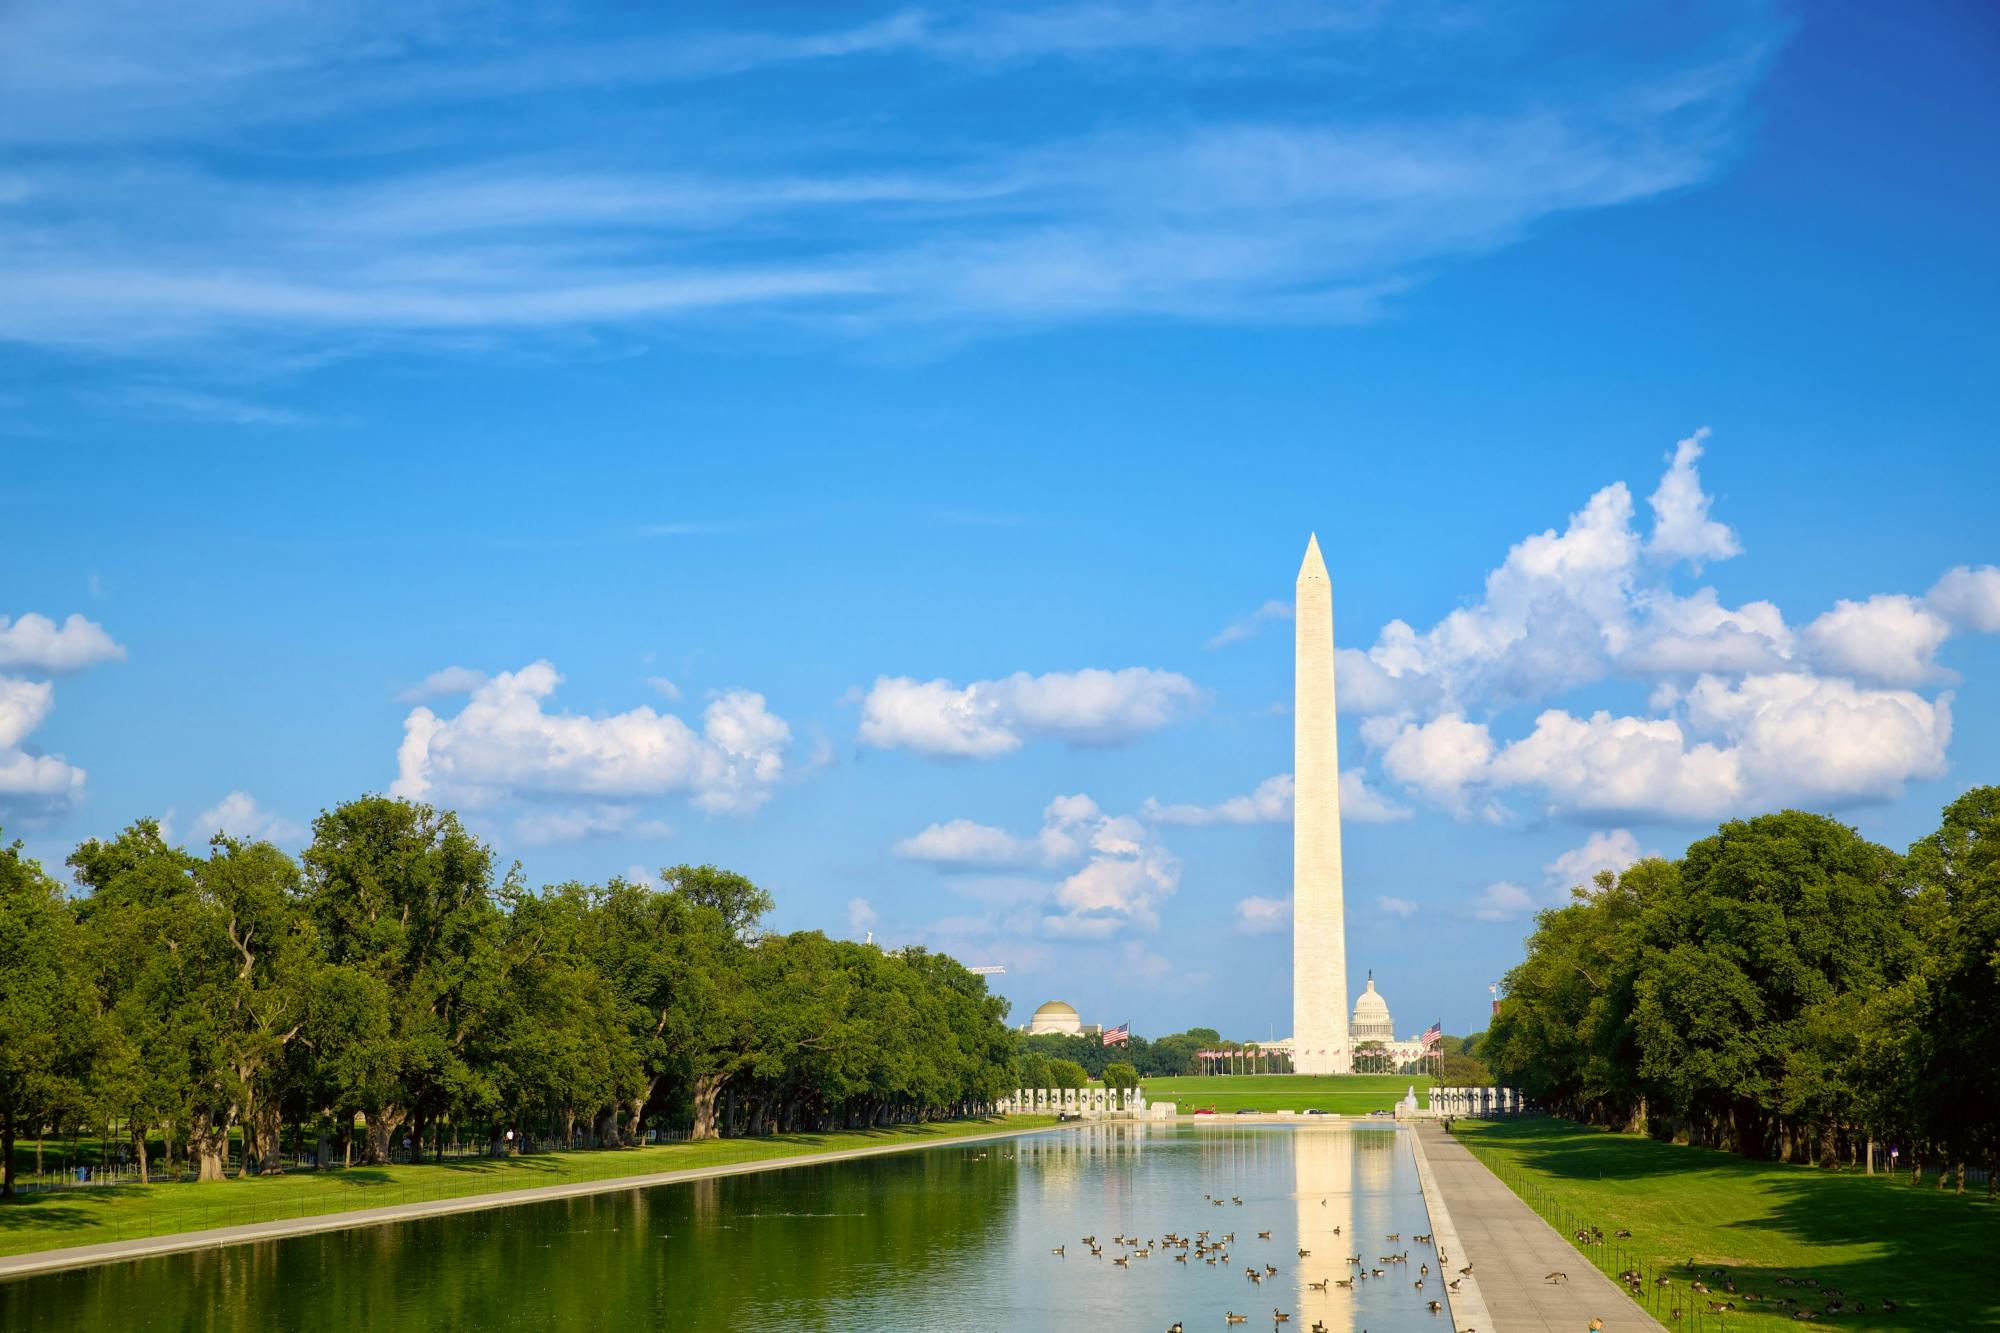 Tour Washington DC National Mall with an exploration game app